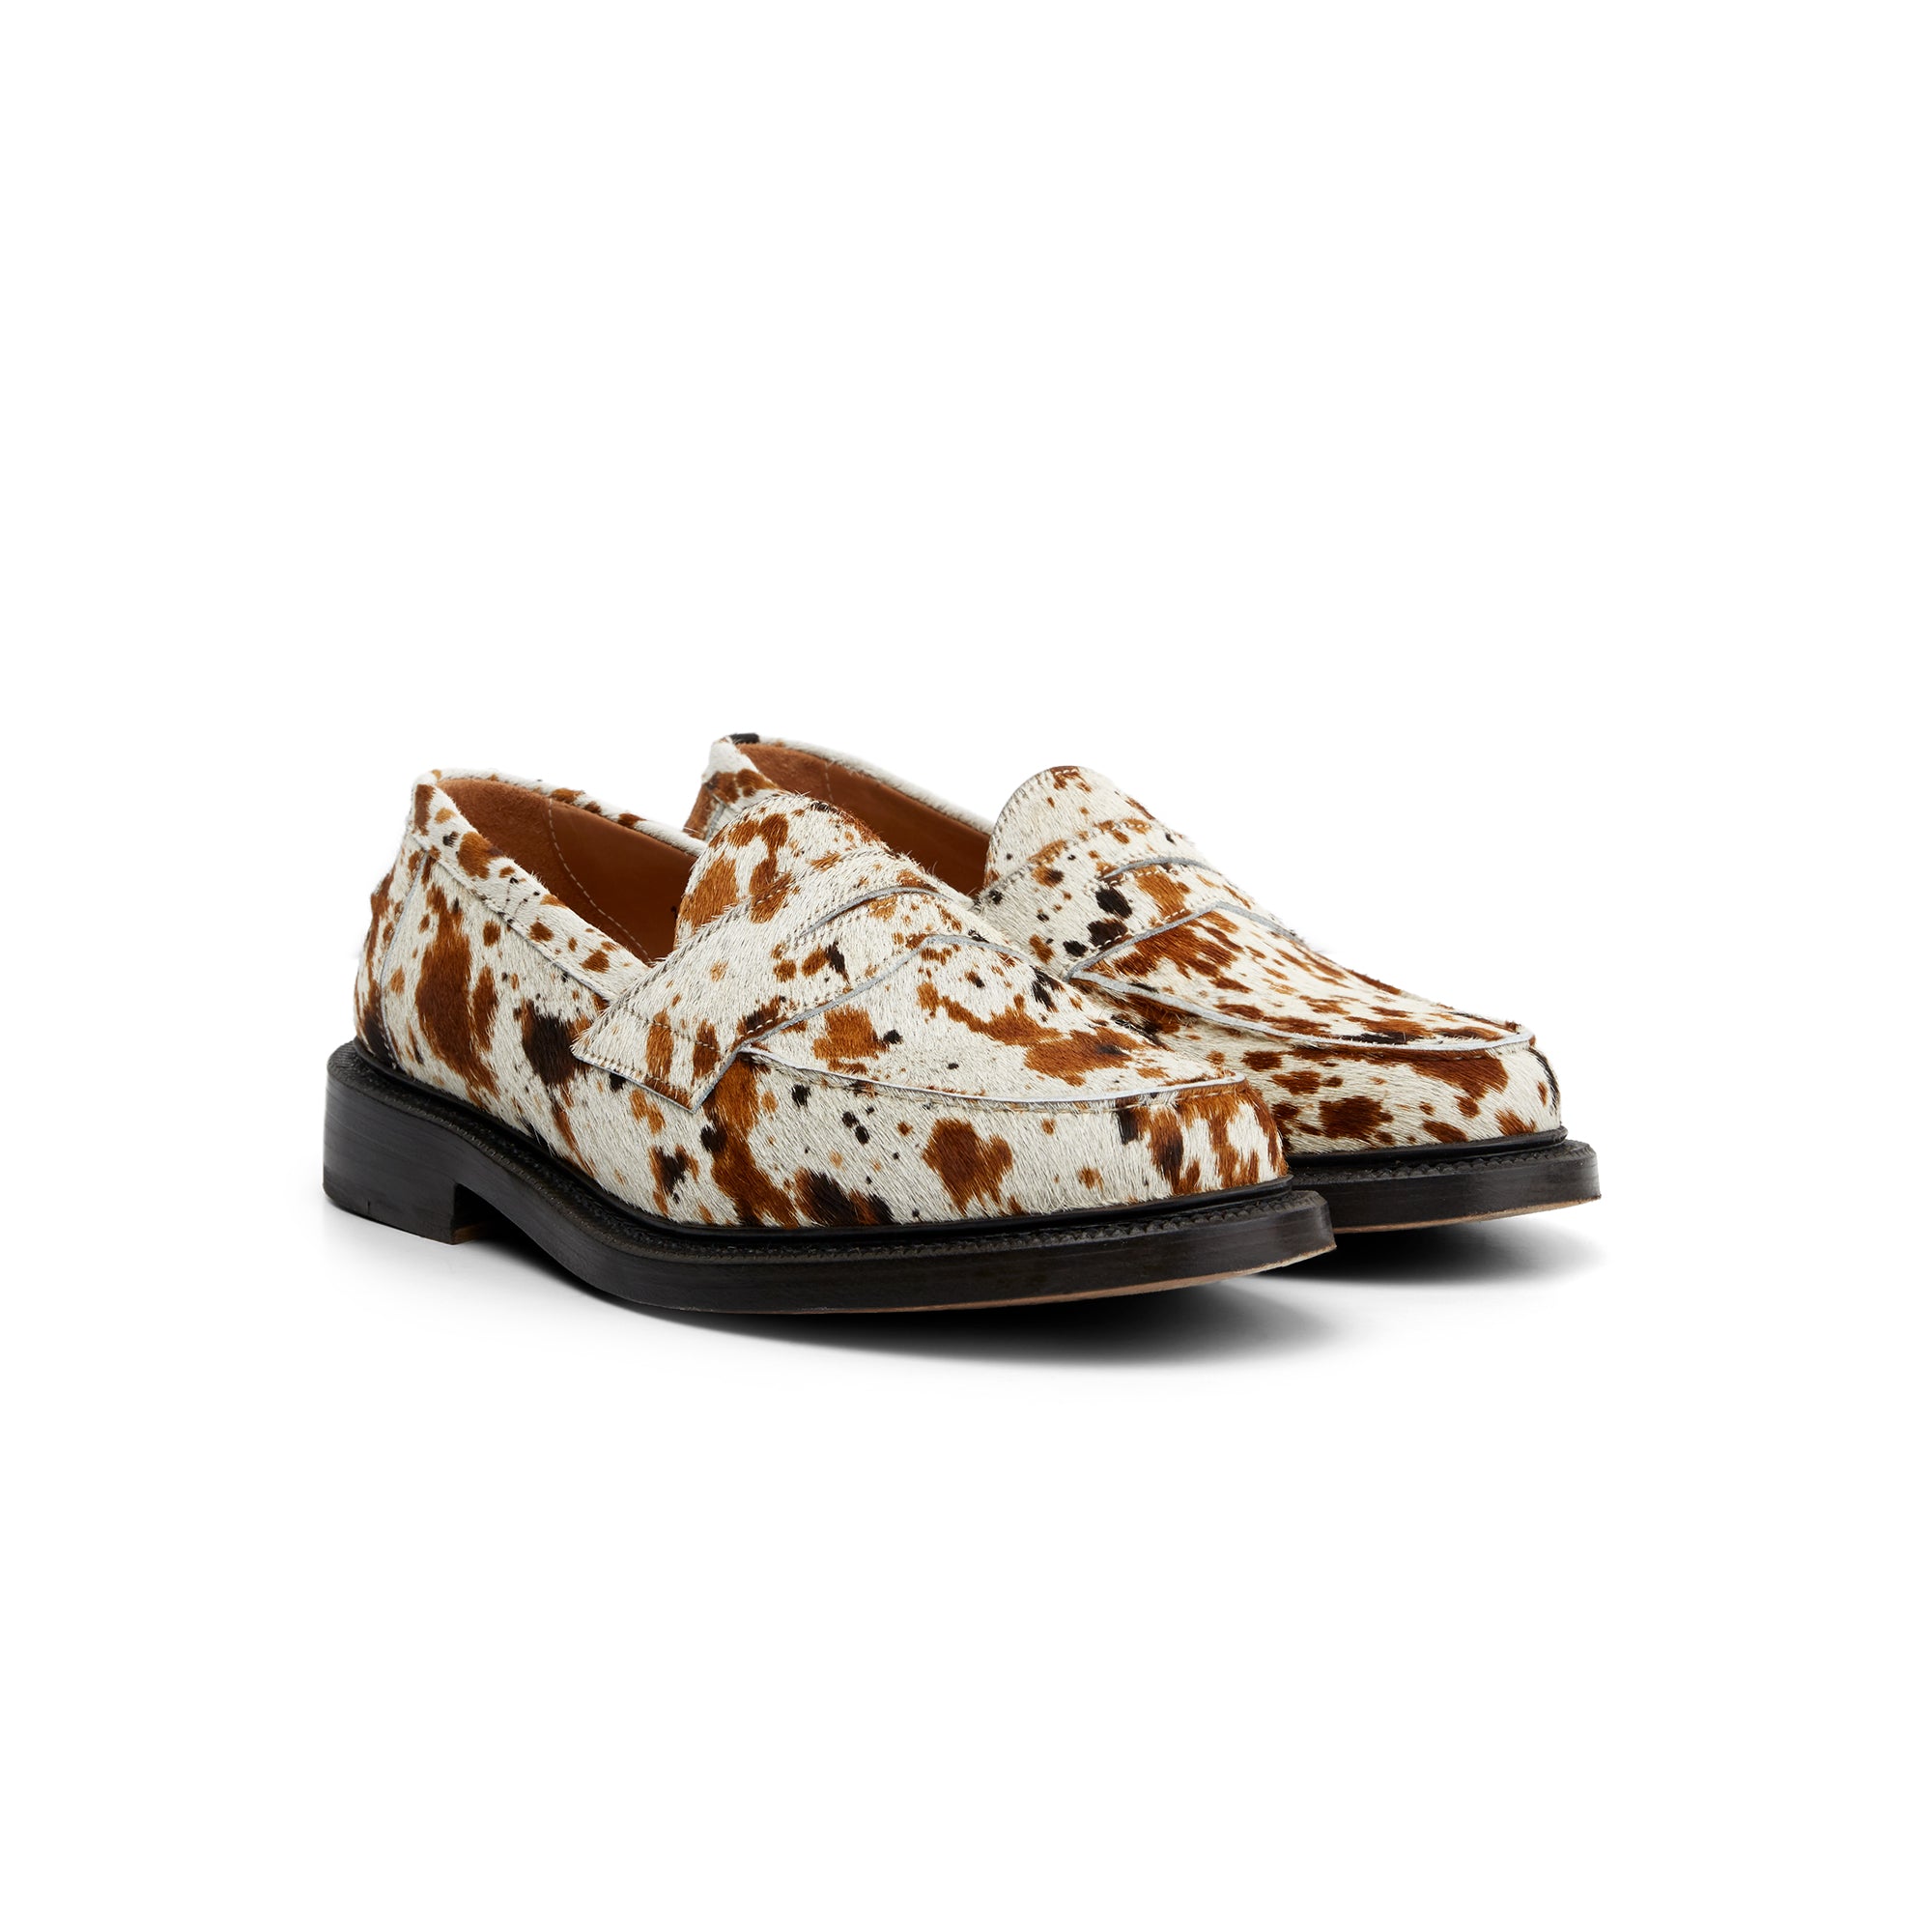 The Ellis Penny Loafer, Palomino